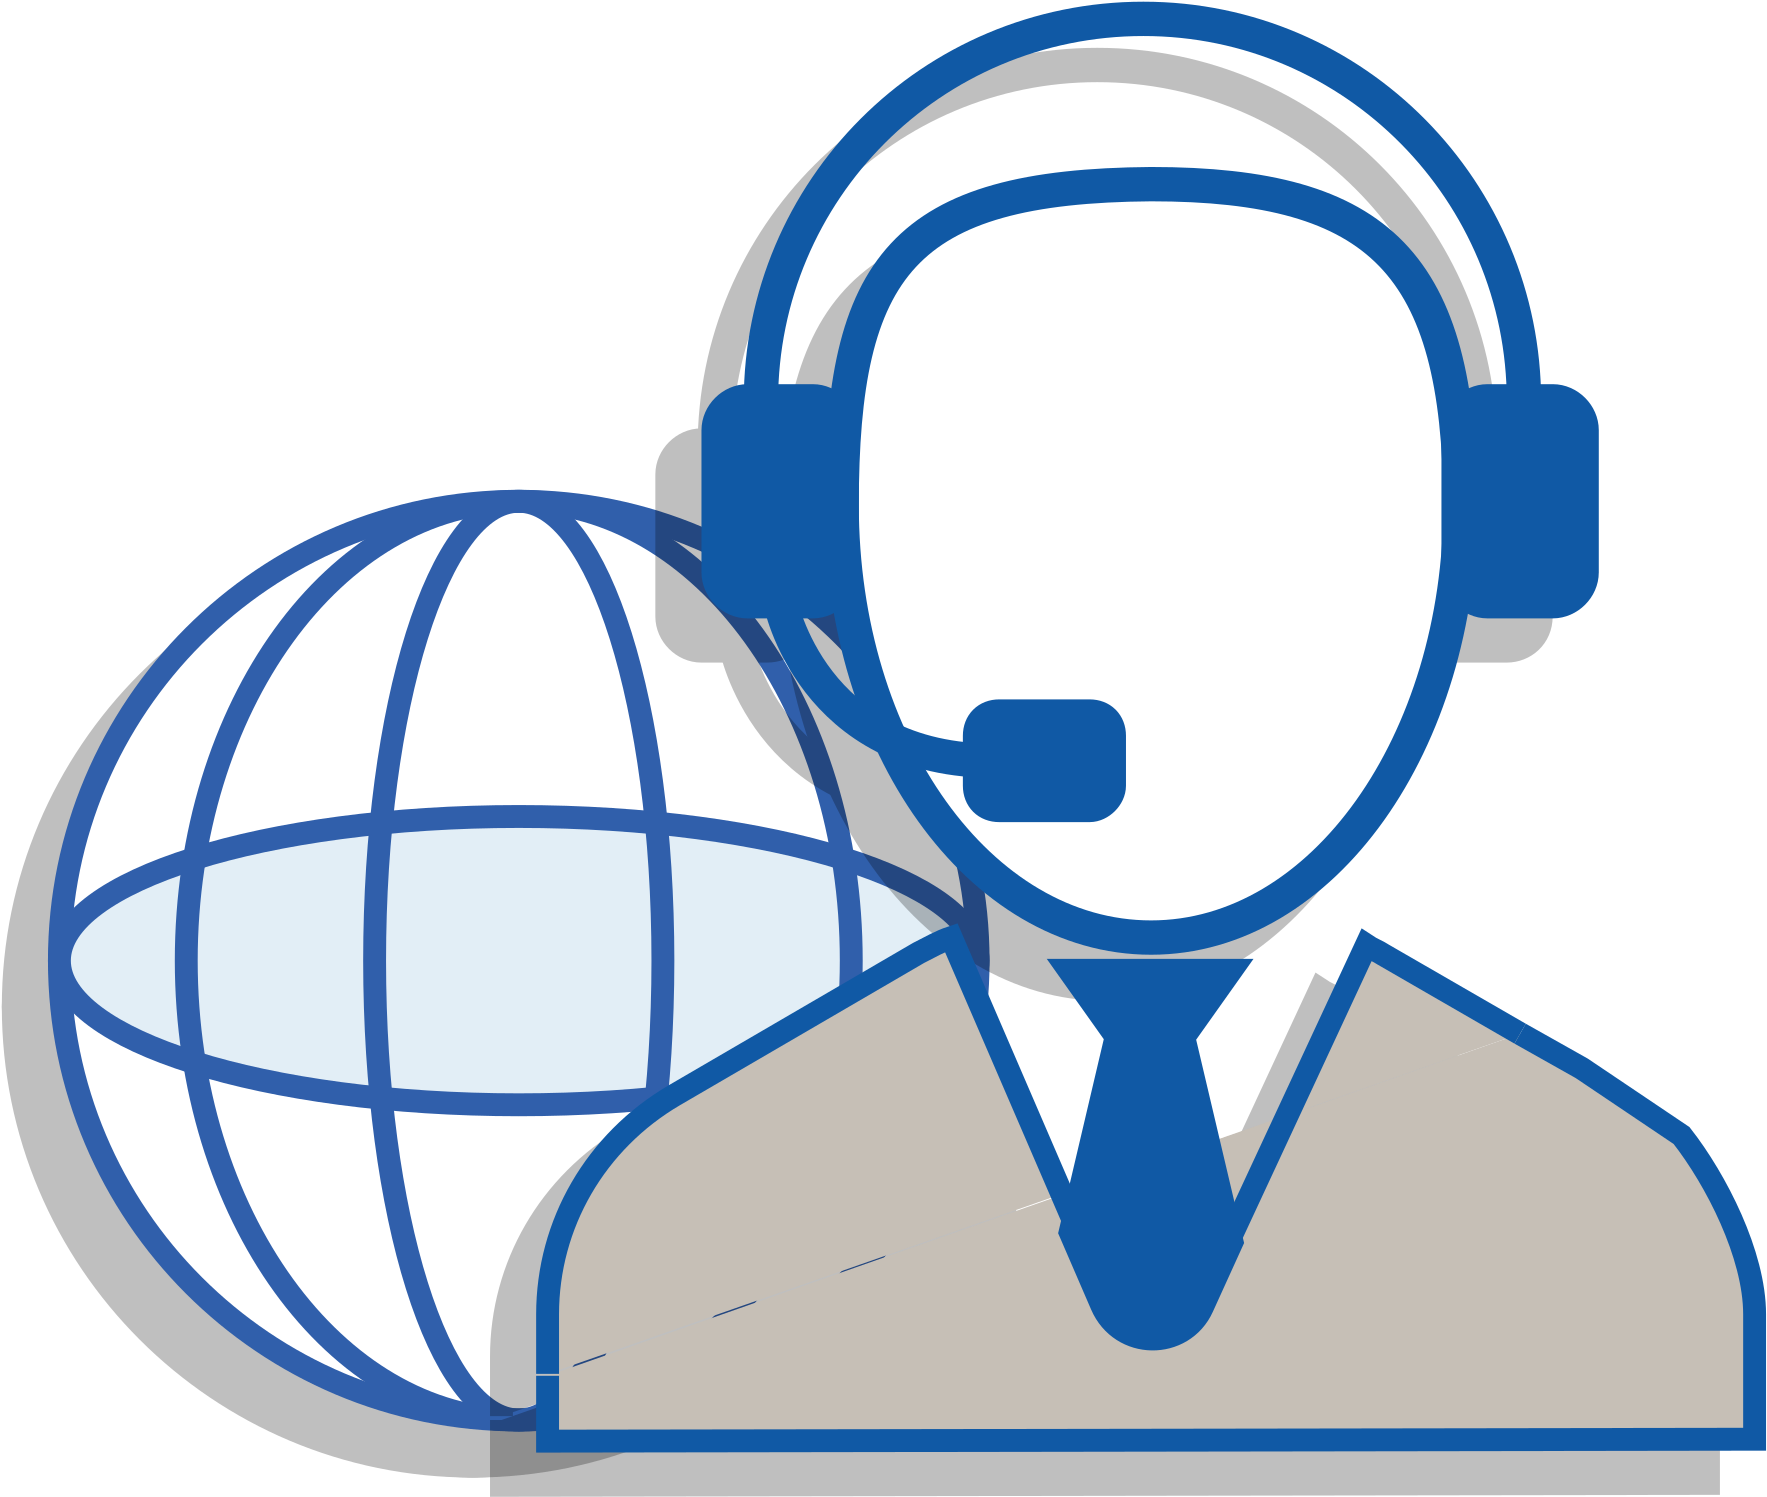 Call Centre Clipart PNG High-Quality Image